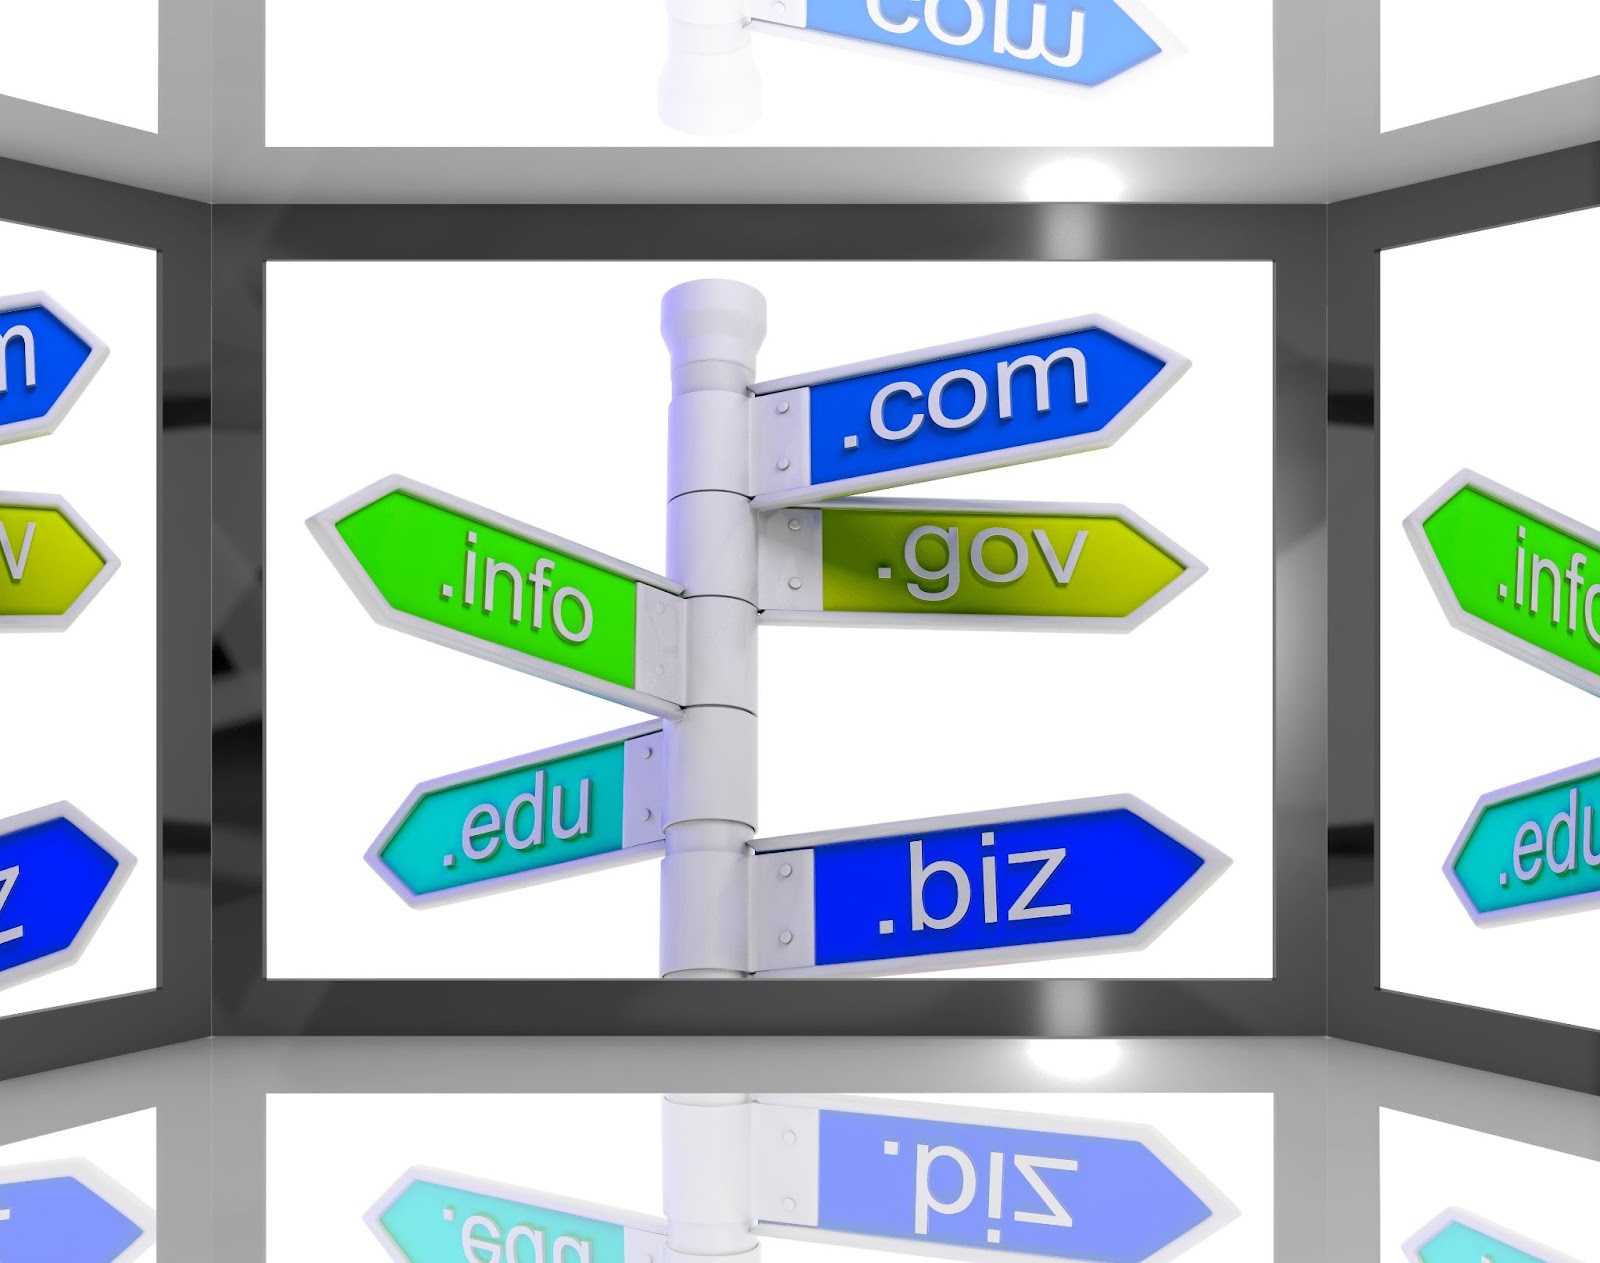 Blue and green colored tags with text of different top level domains such as .com,  .gov, .biz, .edu, and .info